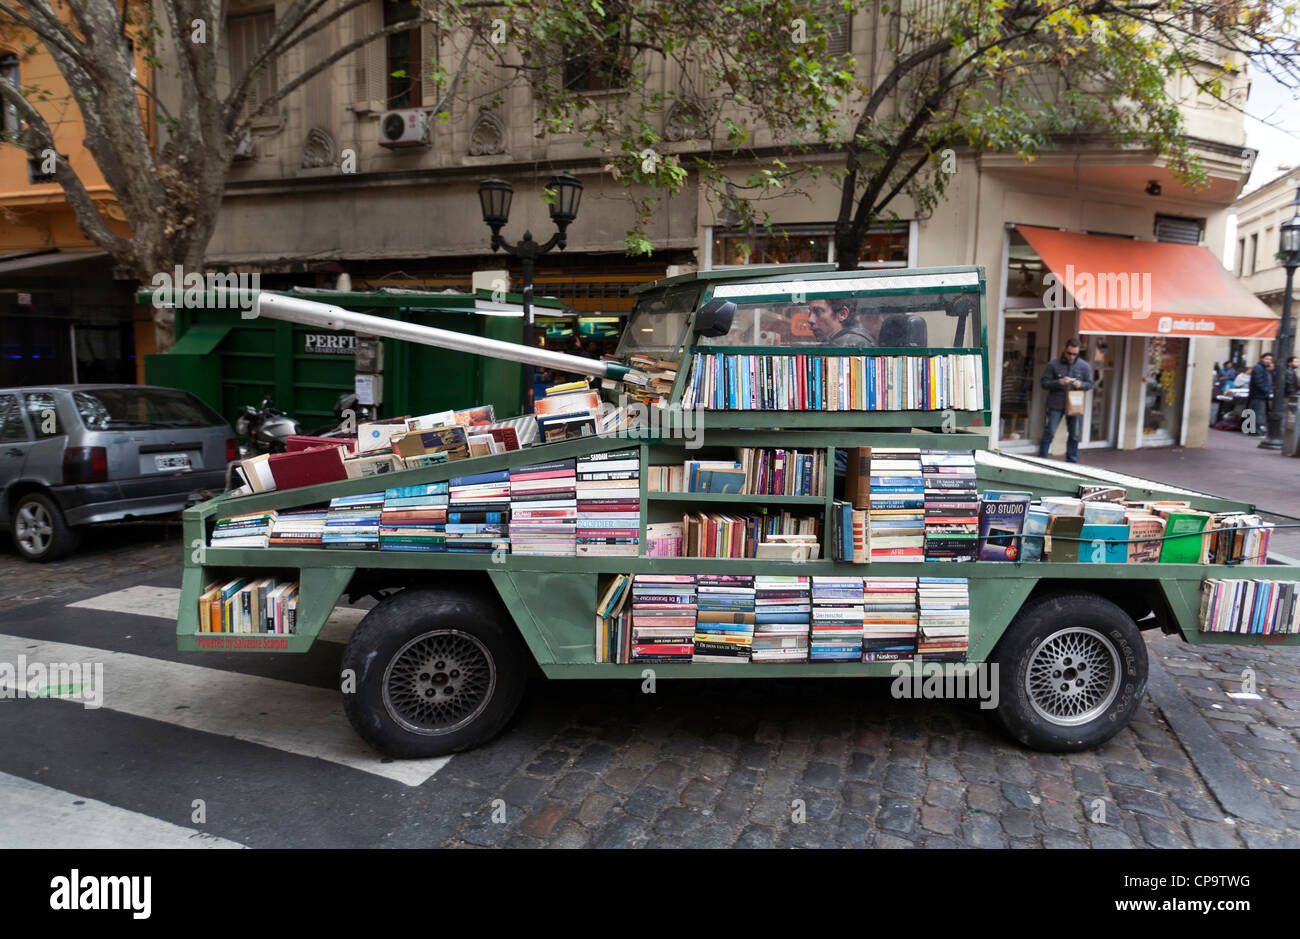 Artist Raul Lemesoff drives his vehicle called "weapon of mass instruction", through the streets of Buenos Aires, Argentina Stock Photo